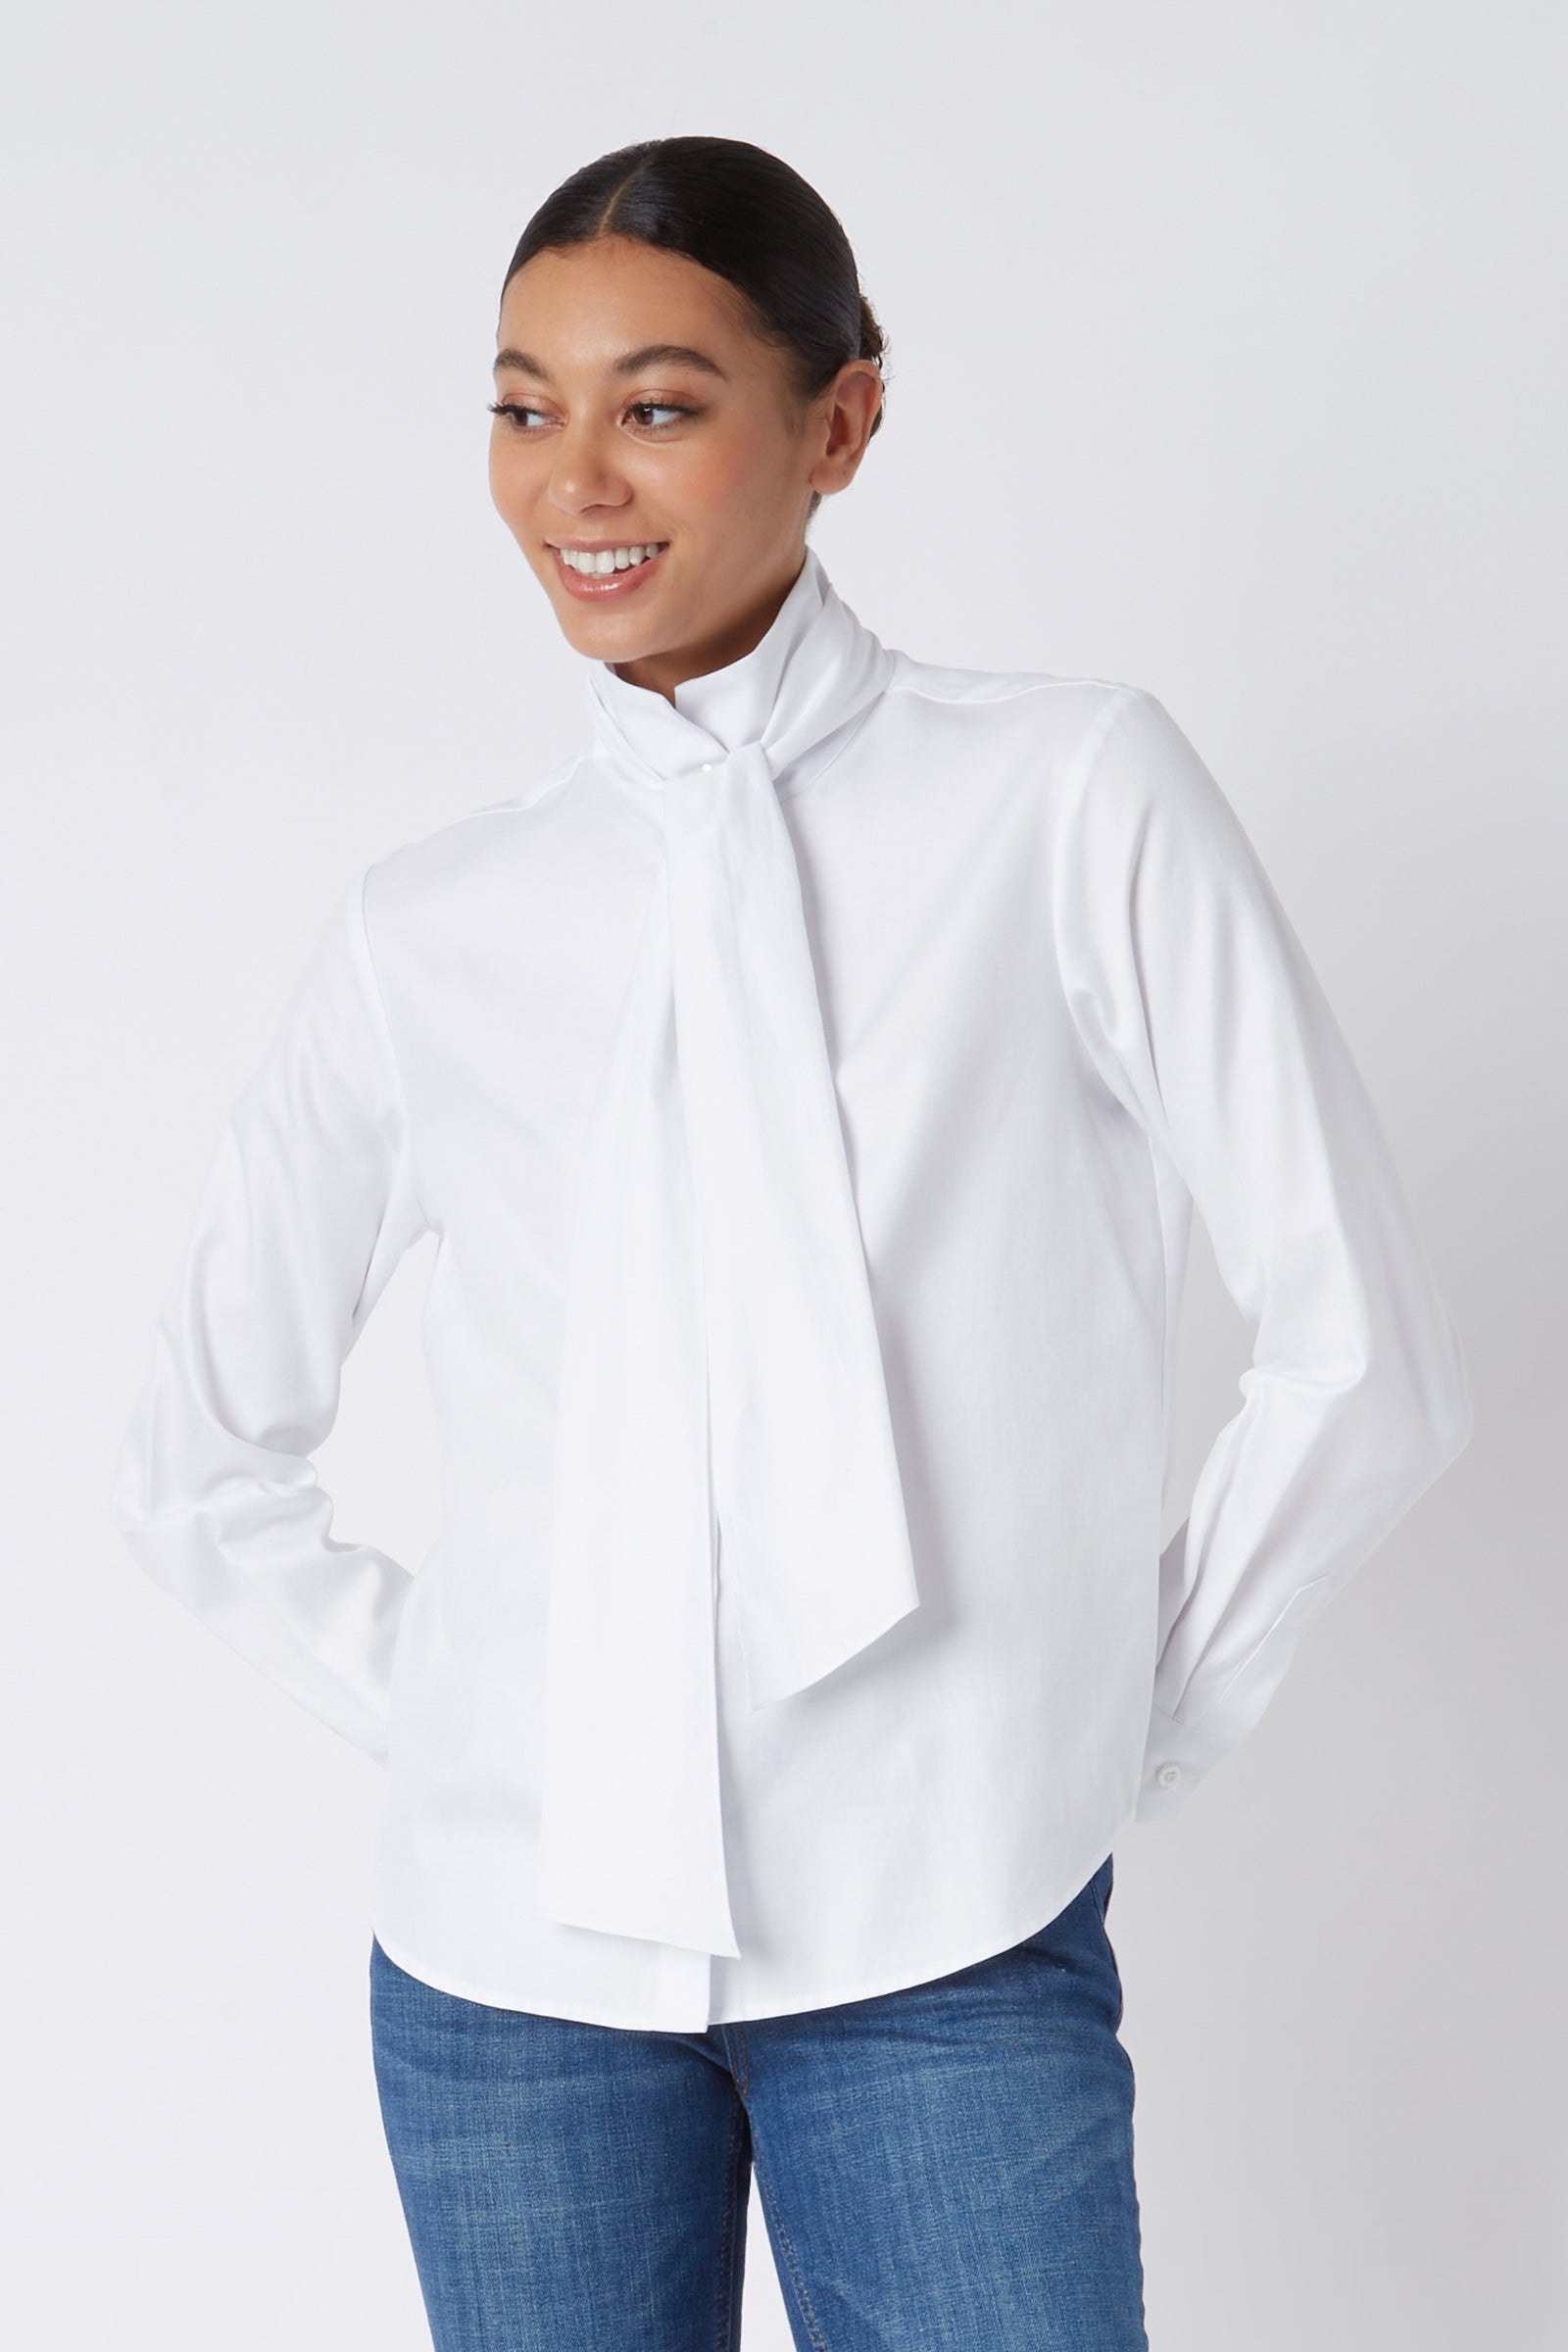 Kal Rieman Pleat Back Regency Blouse in White Twill on Model Looking Right Cropped Front View